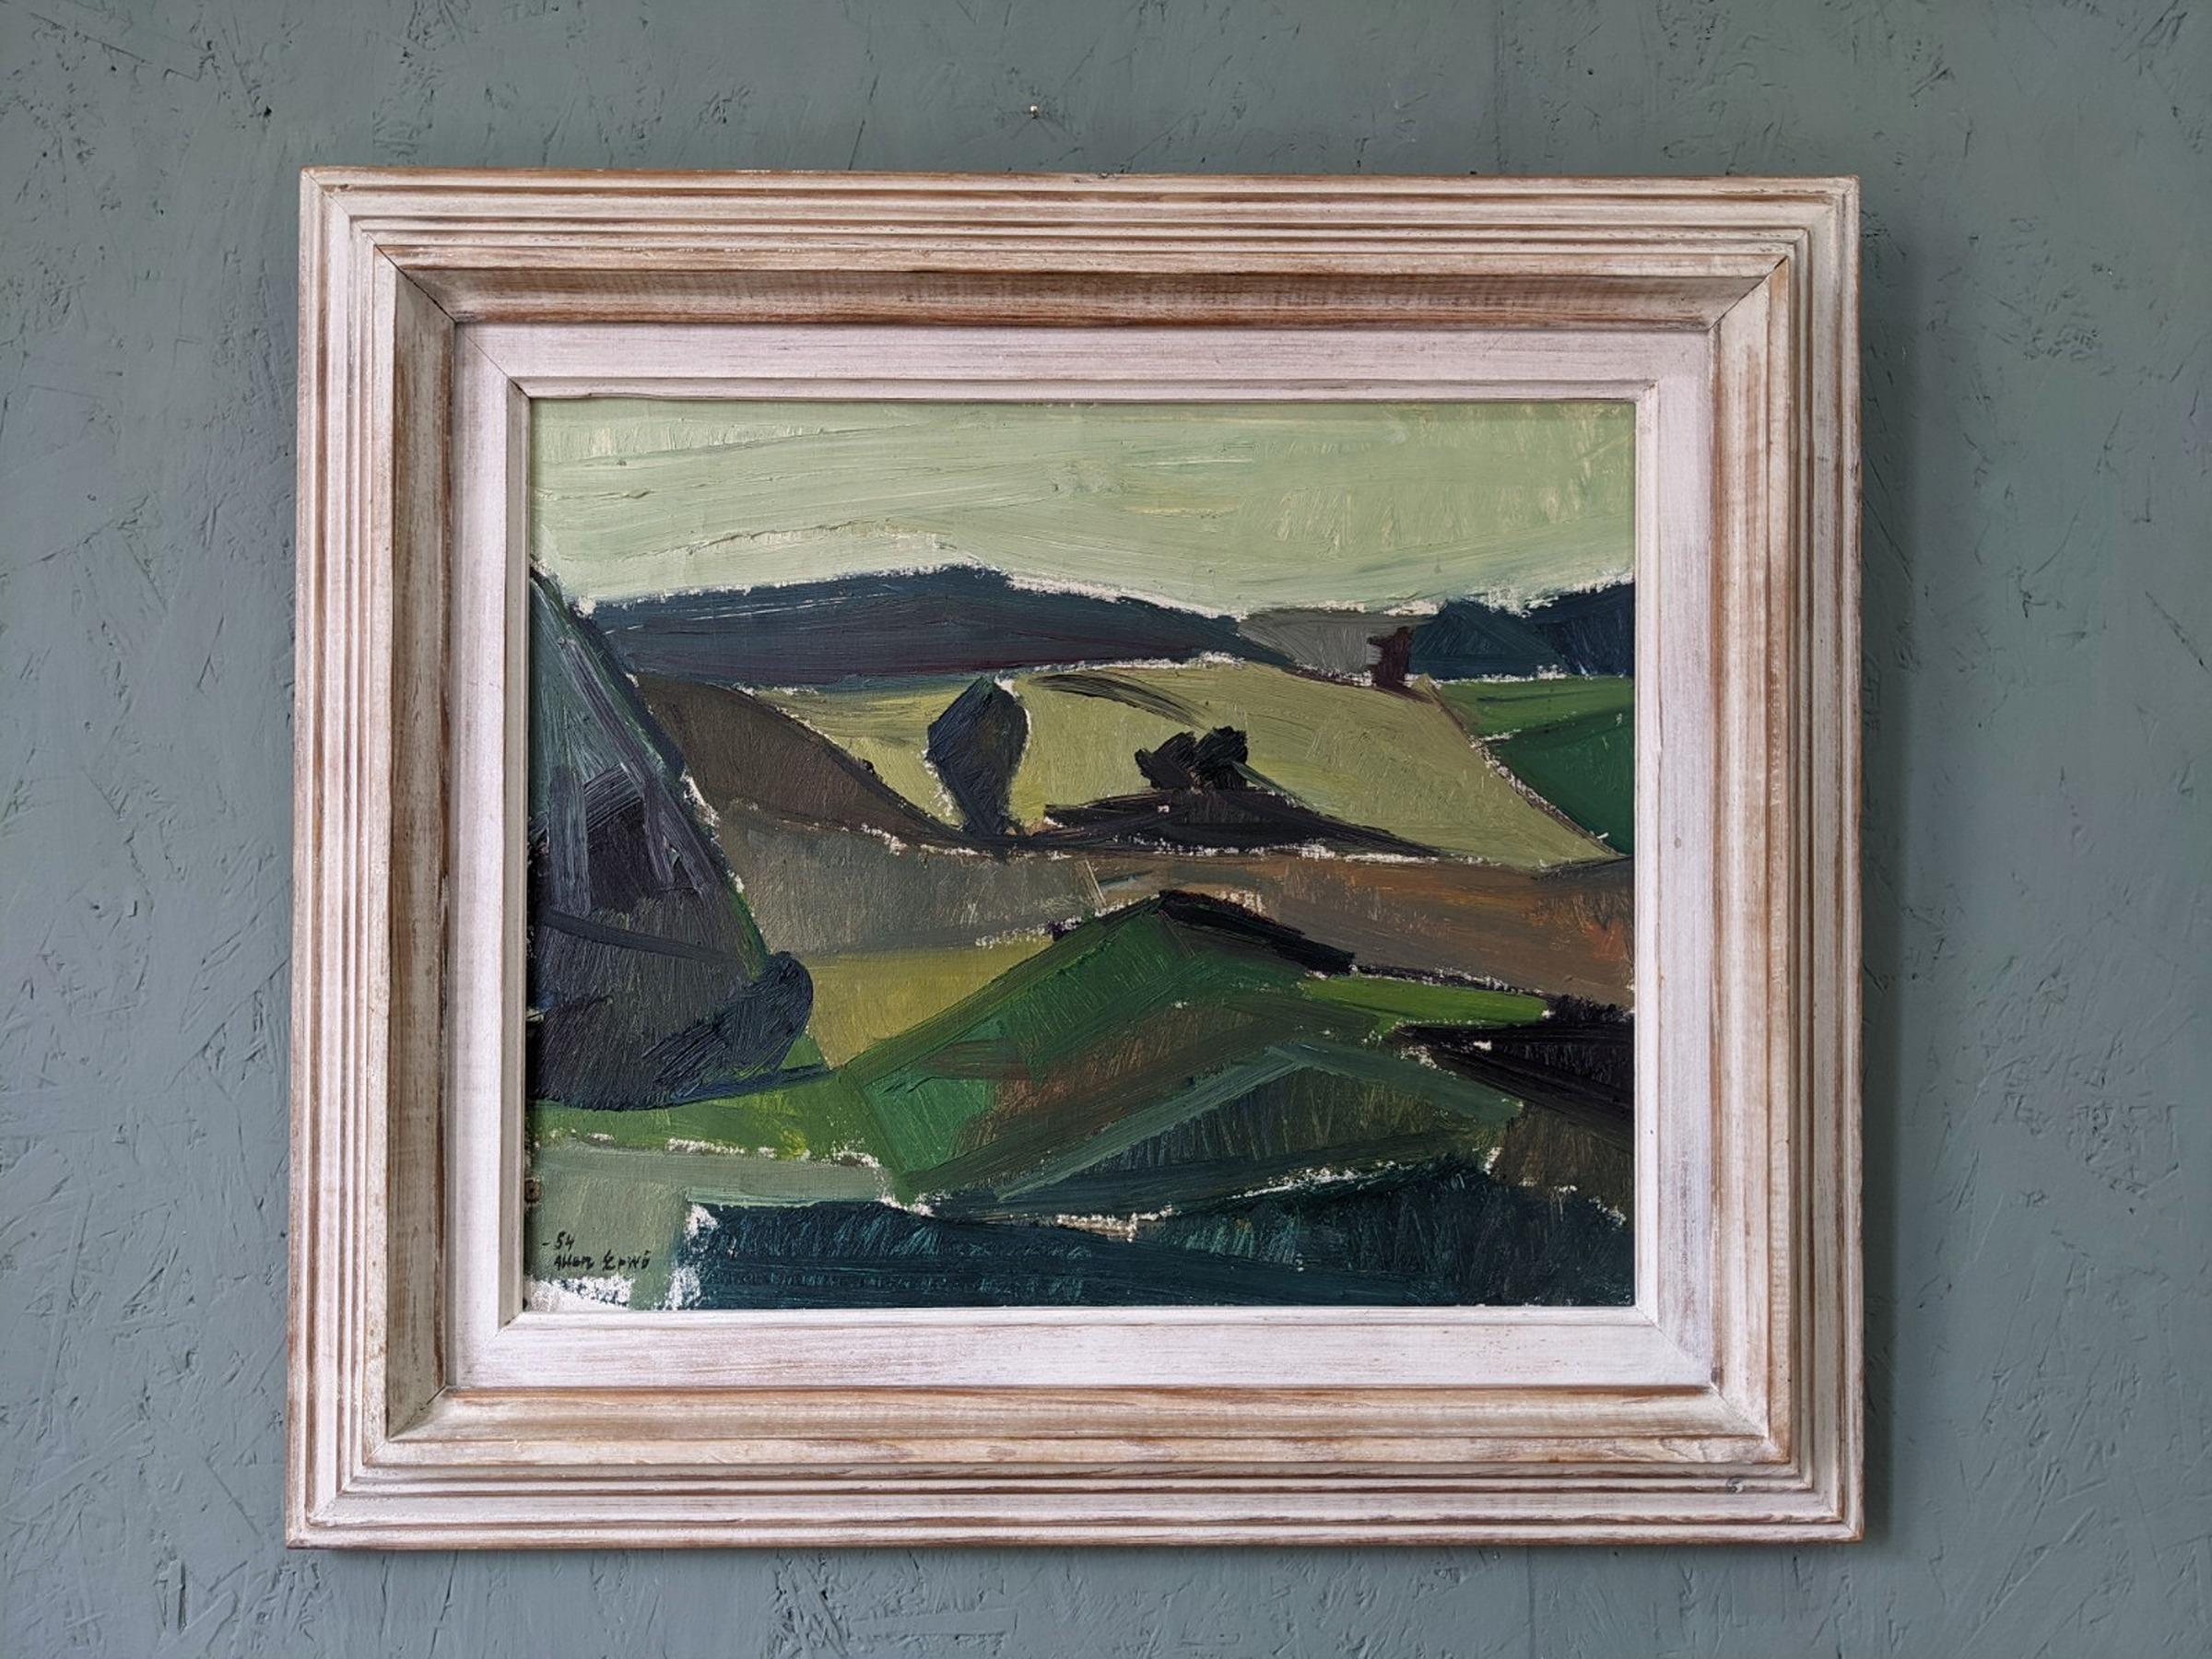 GREEN FIELDS
Size: 56 x 64 cm (including frame)
Oil on Canvas

A fantastic and very confidently executed modernist landscape, painted in oil onto canvas and dated 1954.

This landscape scene depicts an open valley filled with lush greenery, and the